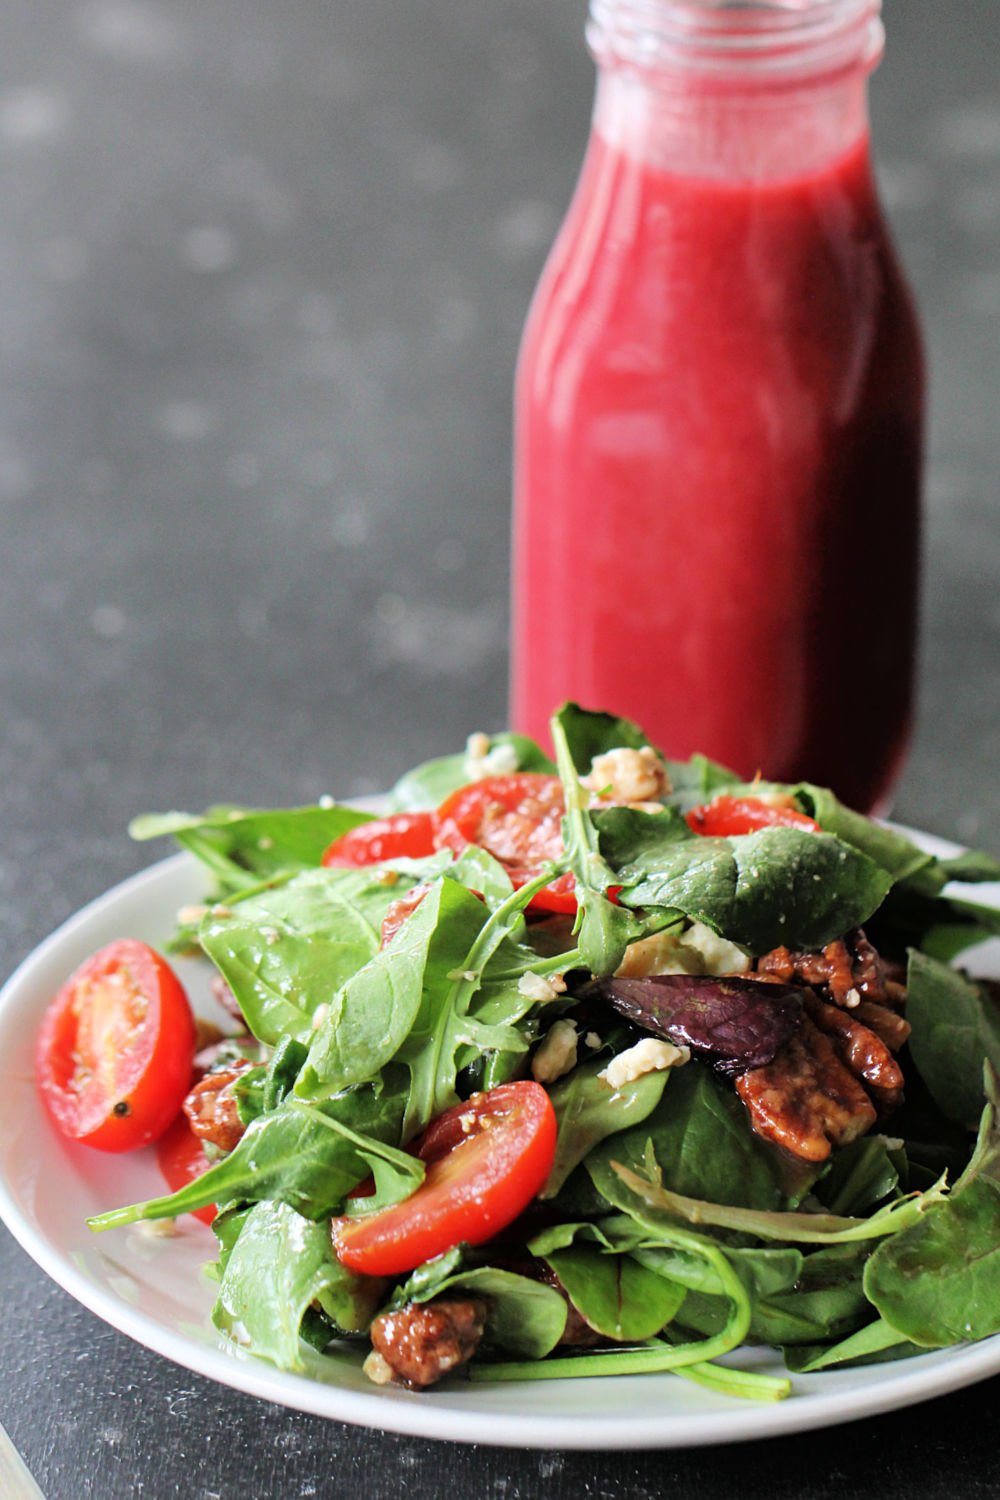 California Salad on a plate with a bottle of homemade Raspberry Vinaigrette Dressing